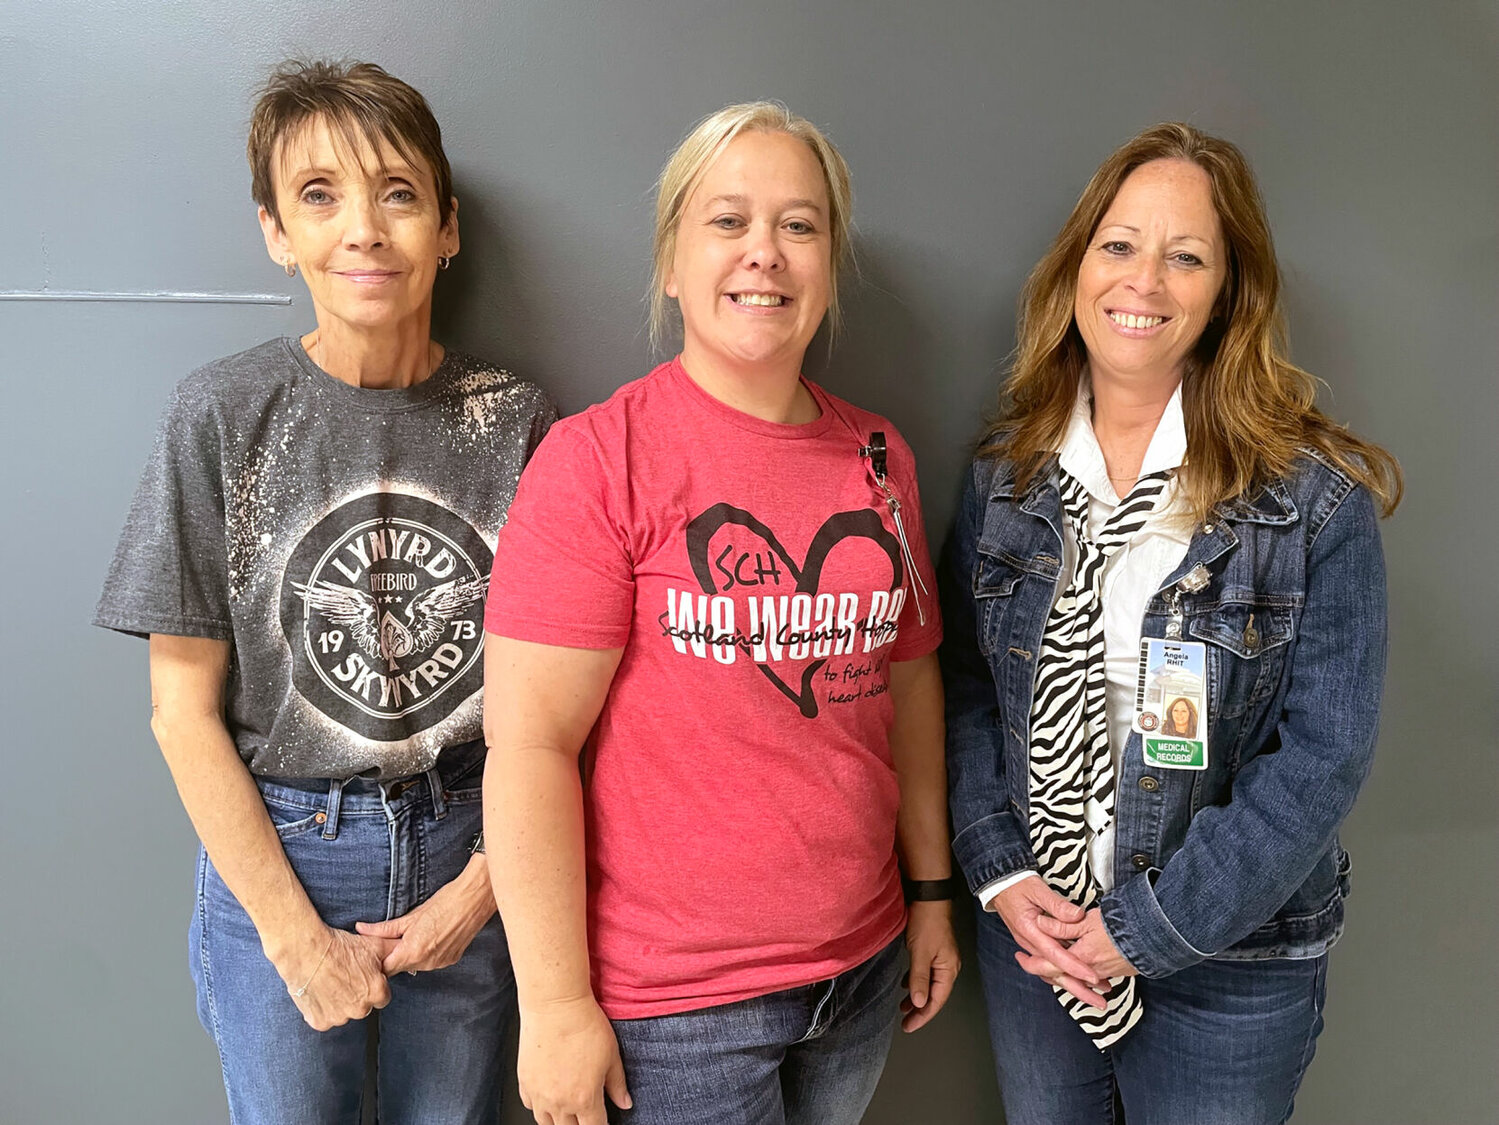 The Employee Experience Committee at Scotland County Hospital recognizes employees, annually, with service pins in five year increments. Angela Schmitter was recognized for 30 years of service, Jennifer McMinn for 25 years of service and Thelma Norton for 20 years of service. L-R: Thelma Norton, Jennifer McMinn and Angela Schmitter.